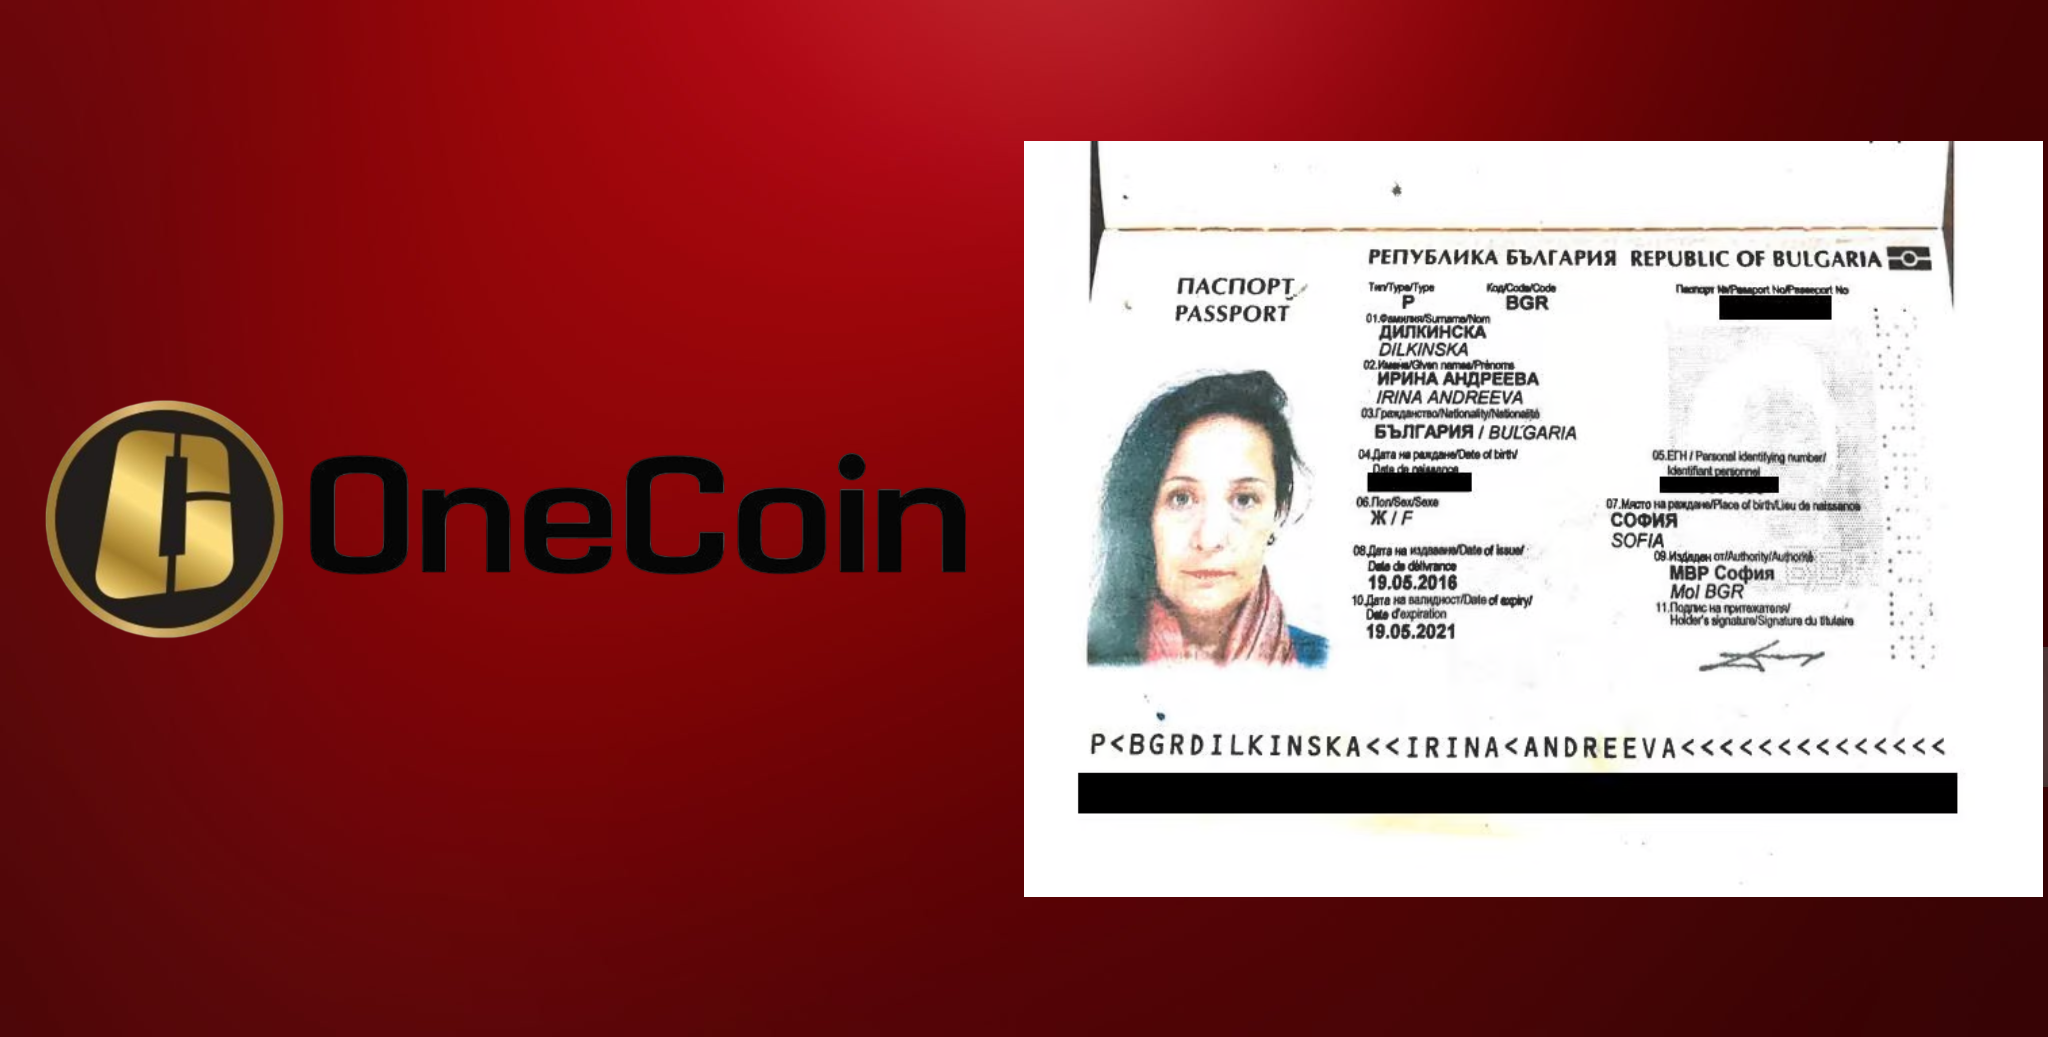 Irina Dilkinska was sentenced to 4 years in prison and ordered to forfeit $111.4 million for her role in laundering $110 million and assisting operations of the $4 billion OneCoin cryptocurrency scam.